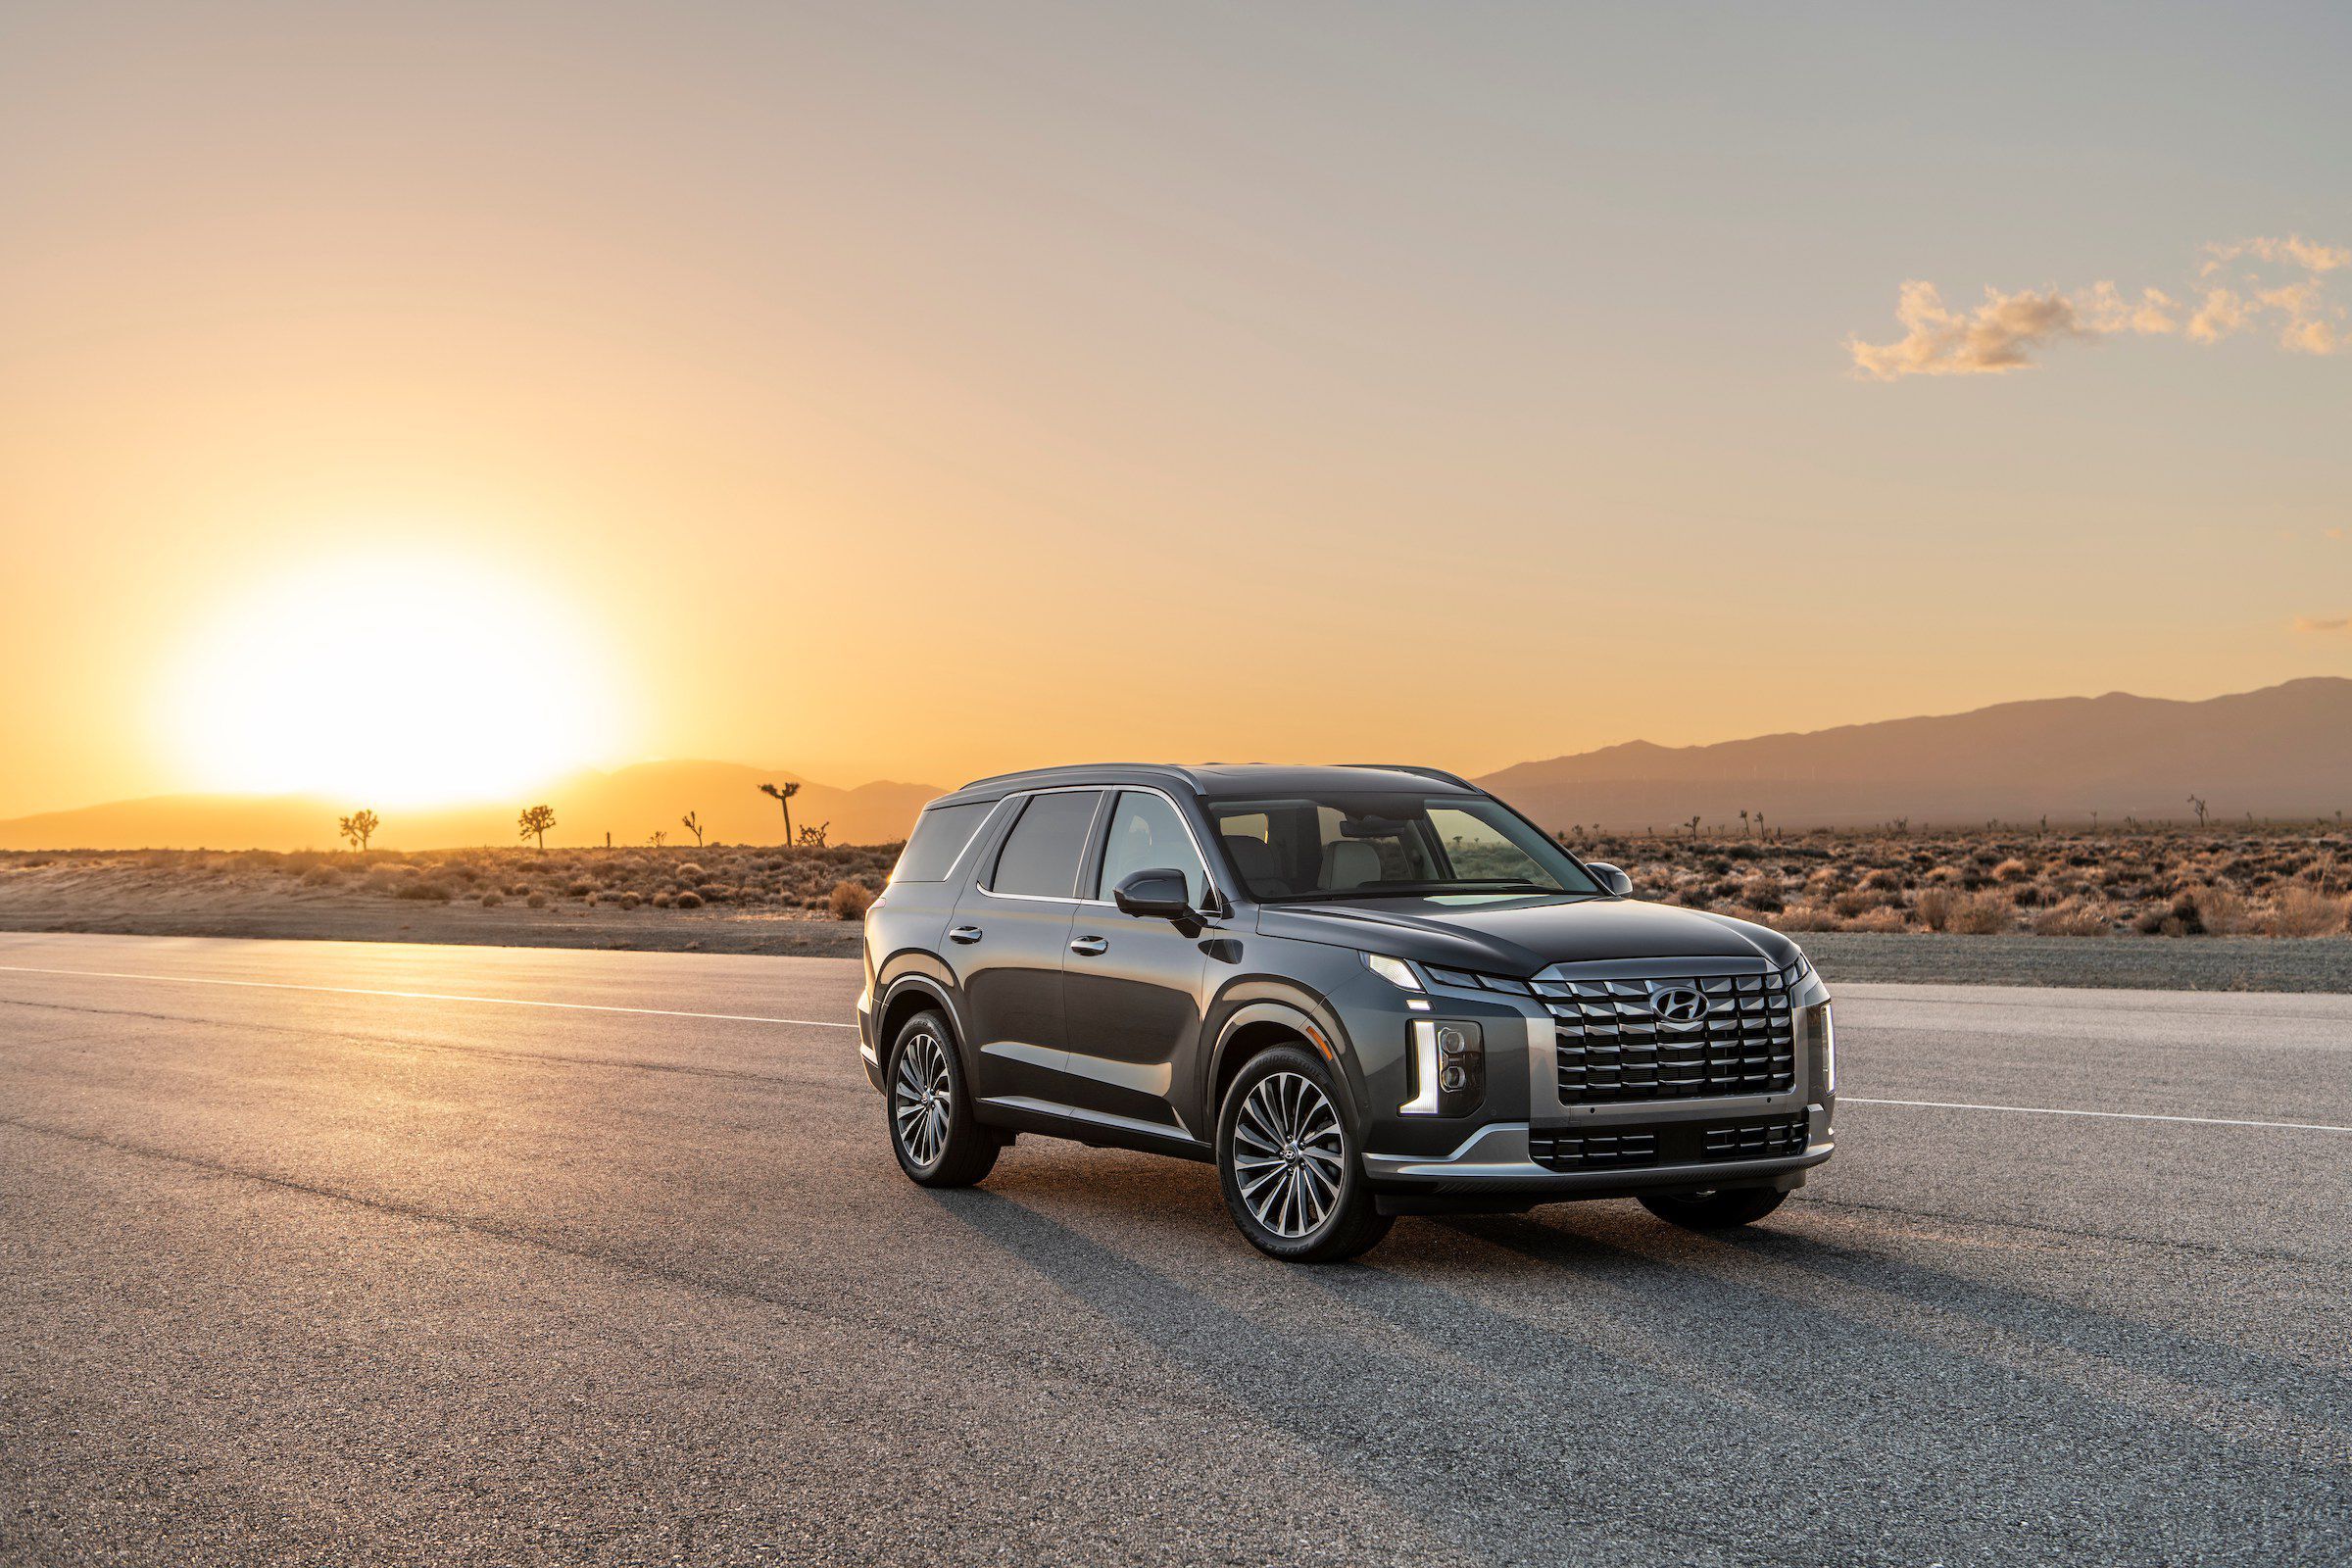 Auto review: Reimagined 2023 Hyundai Palisade delivers, remains a leading  3-row SUV – The Oakland Press